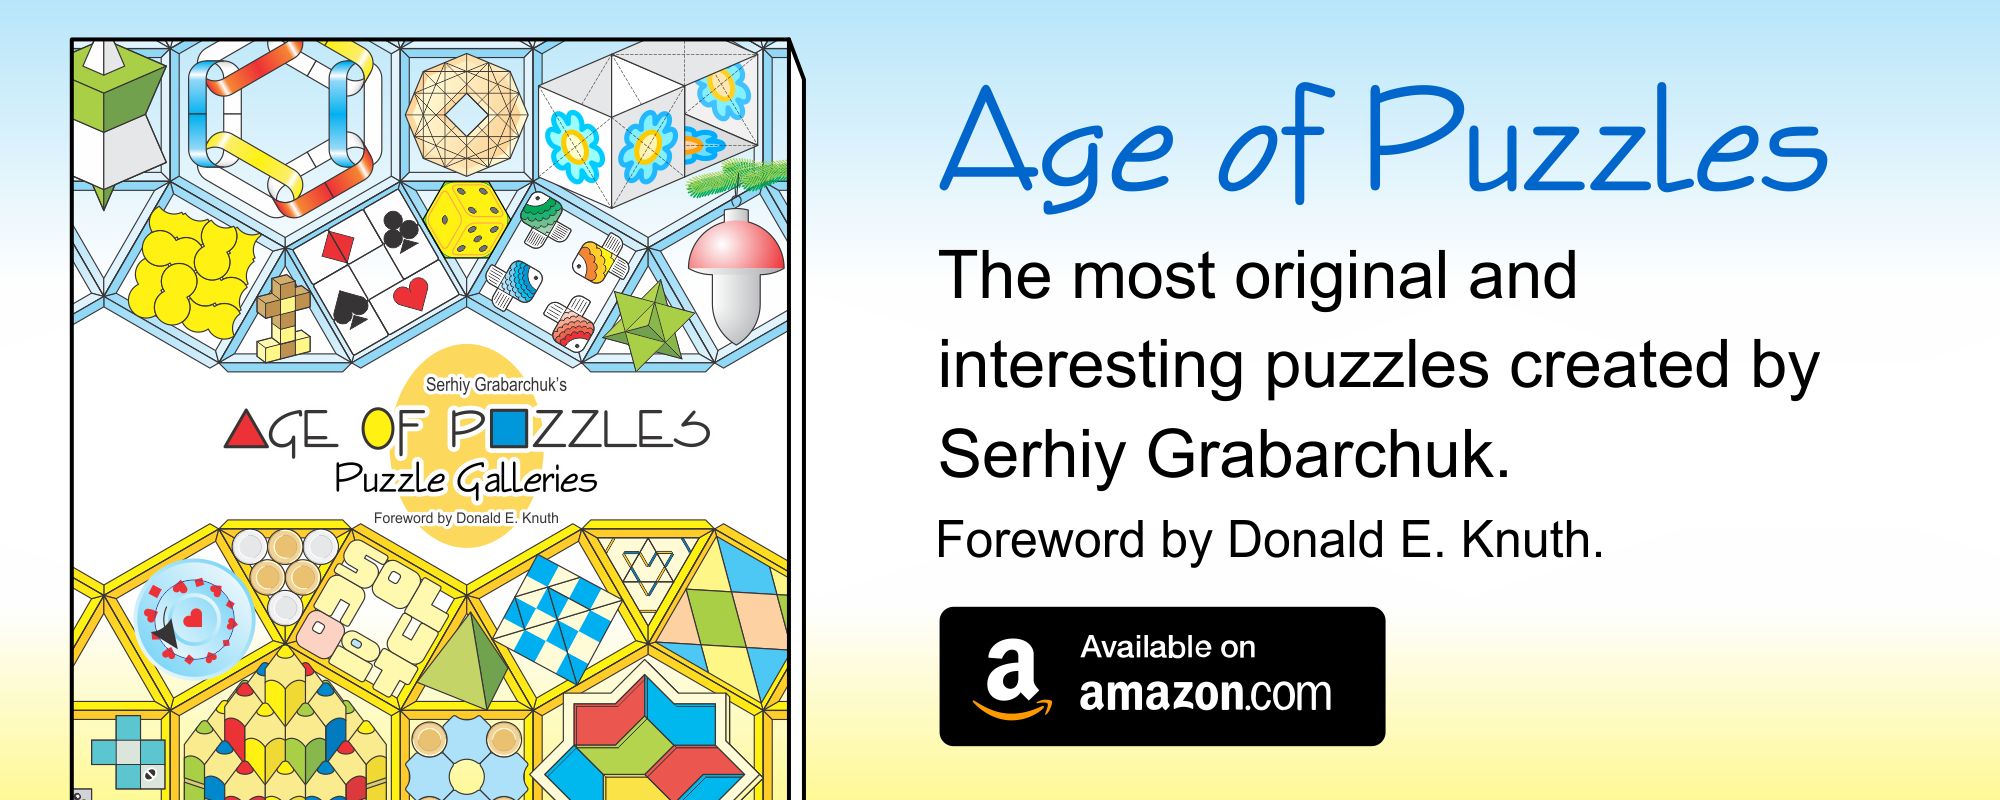 Age of Puzzles